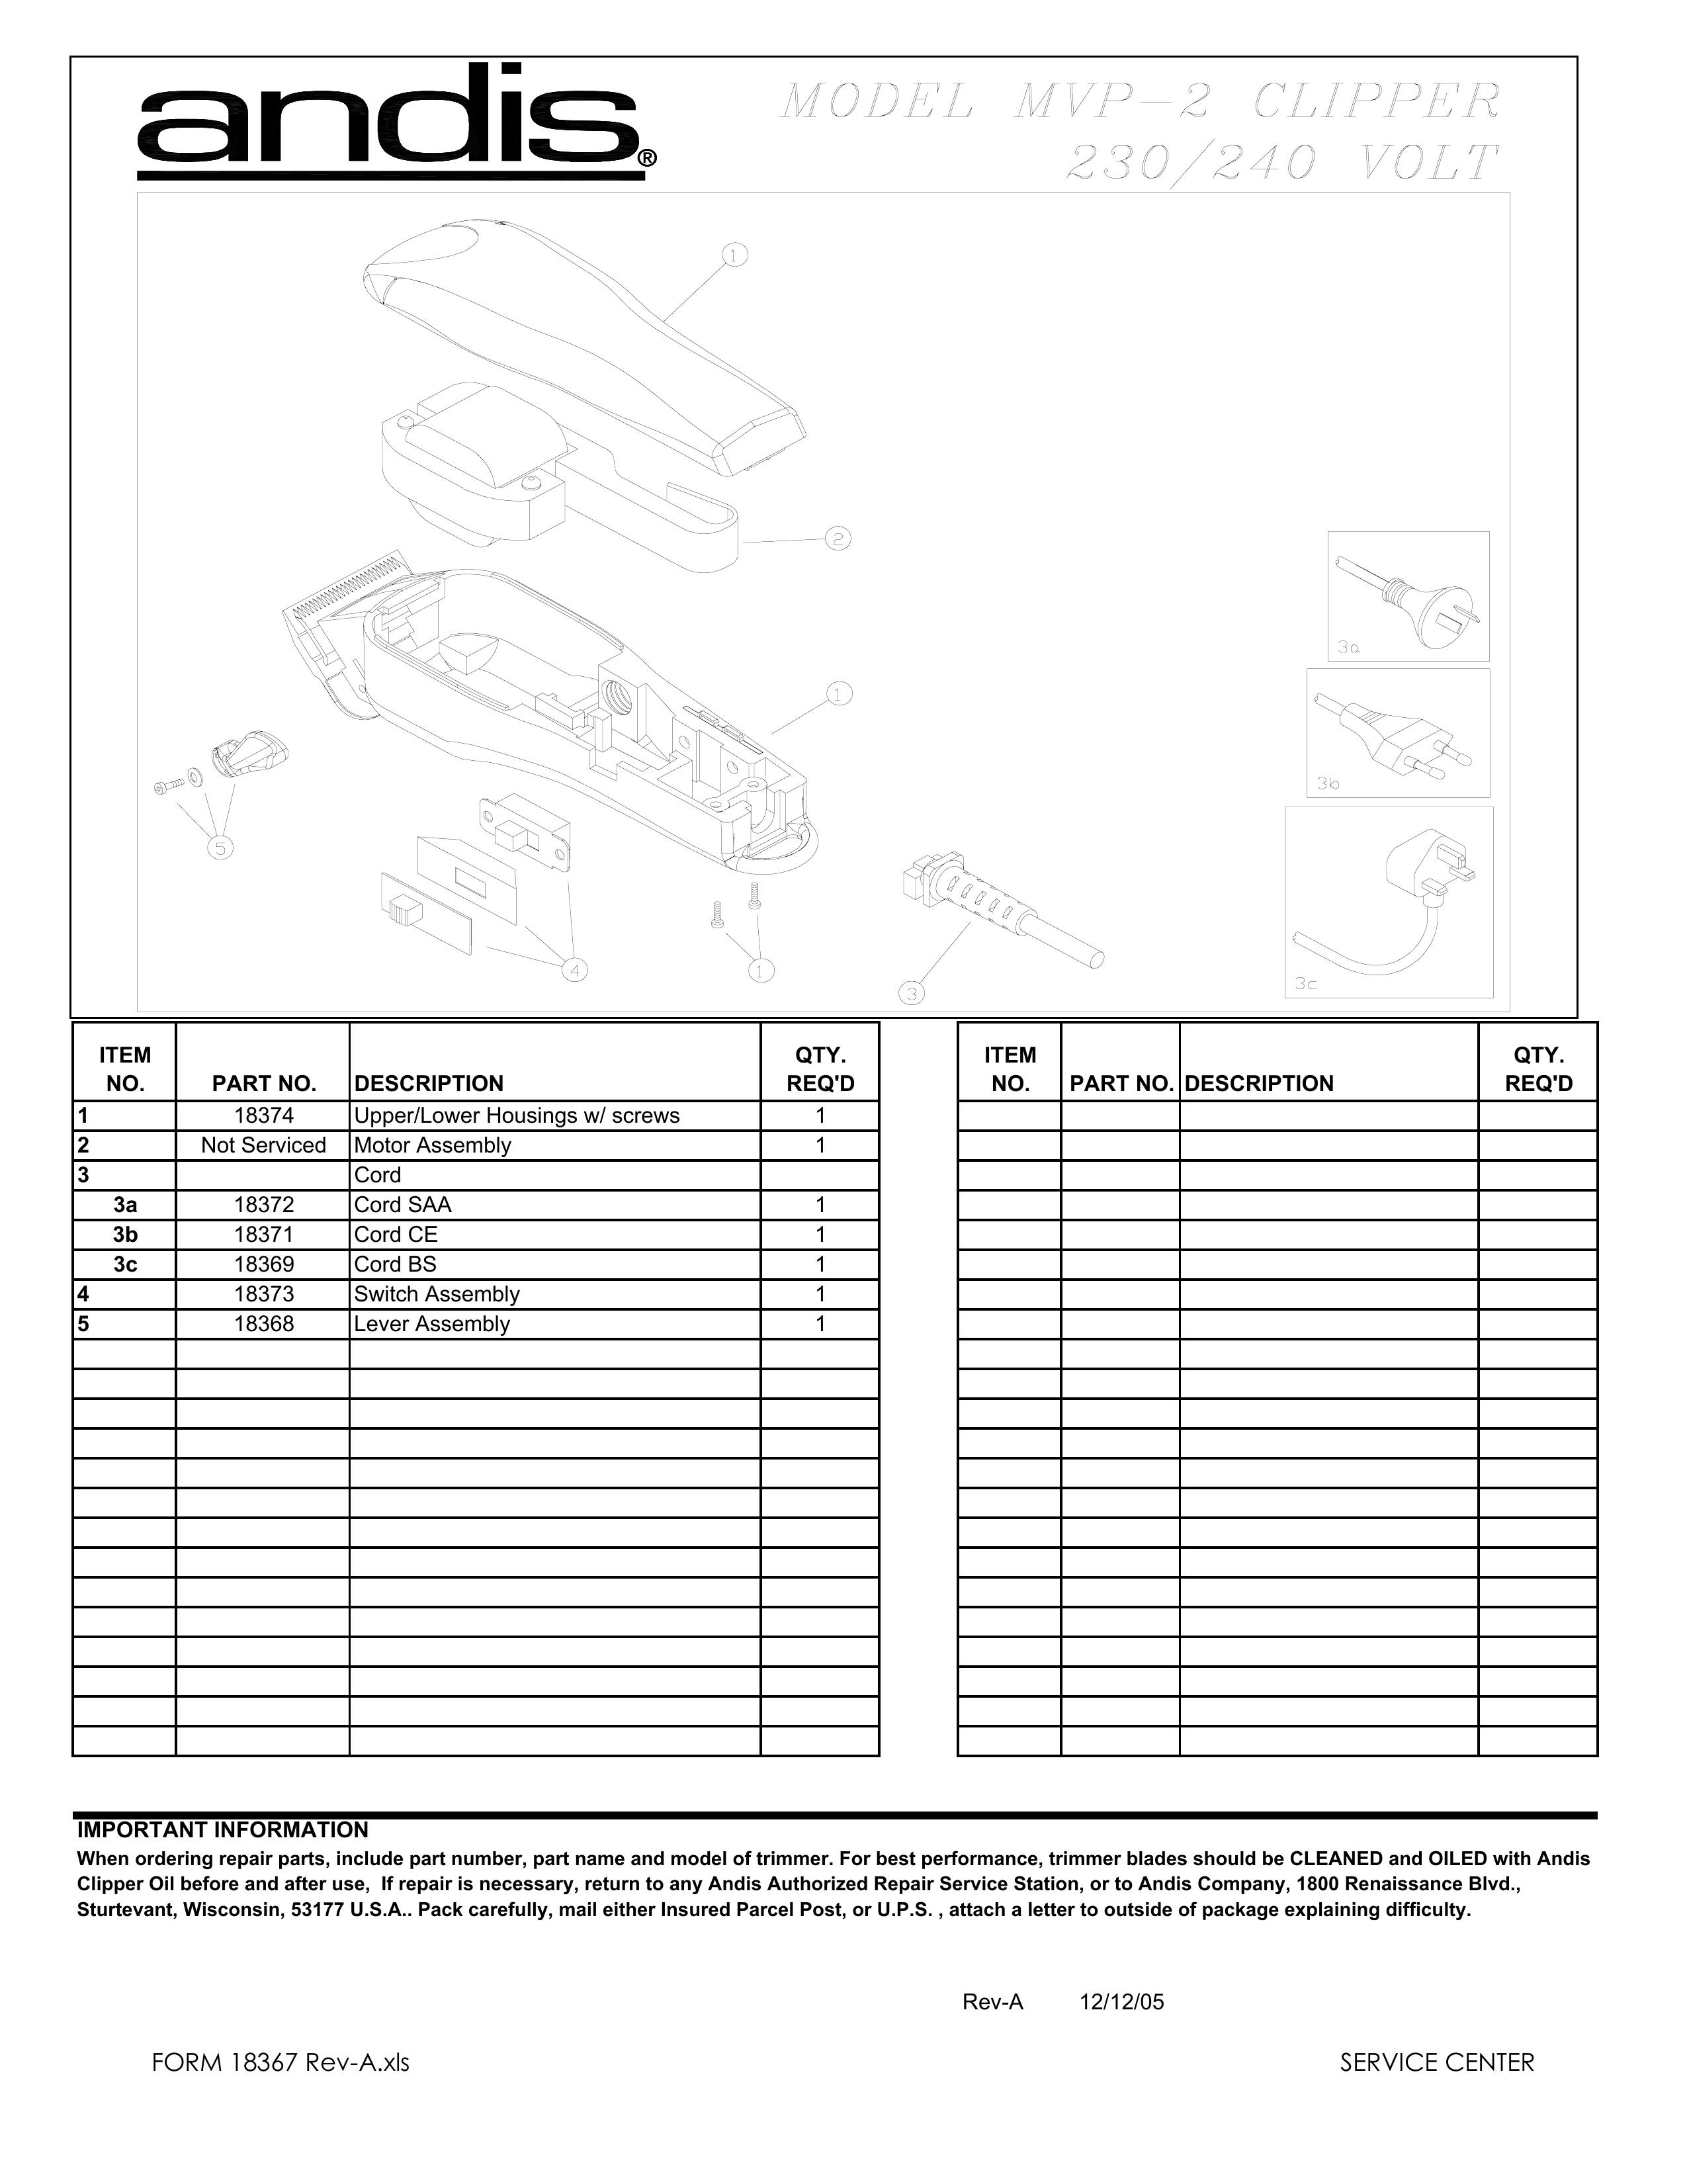 Andis Company MVP-2 Trimmer User Manual